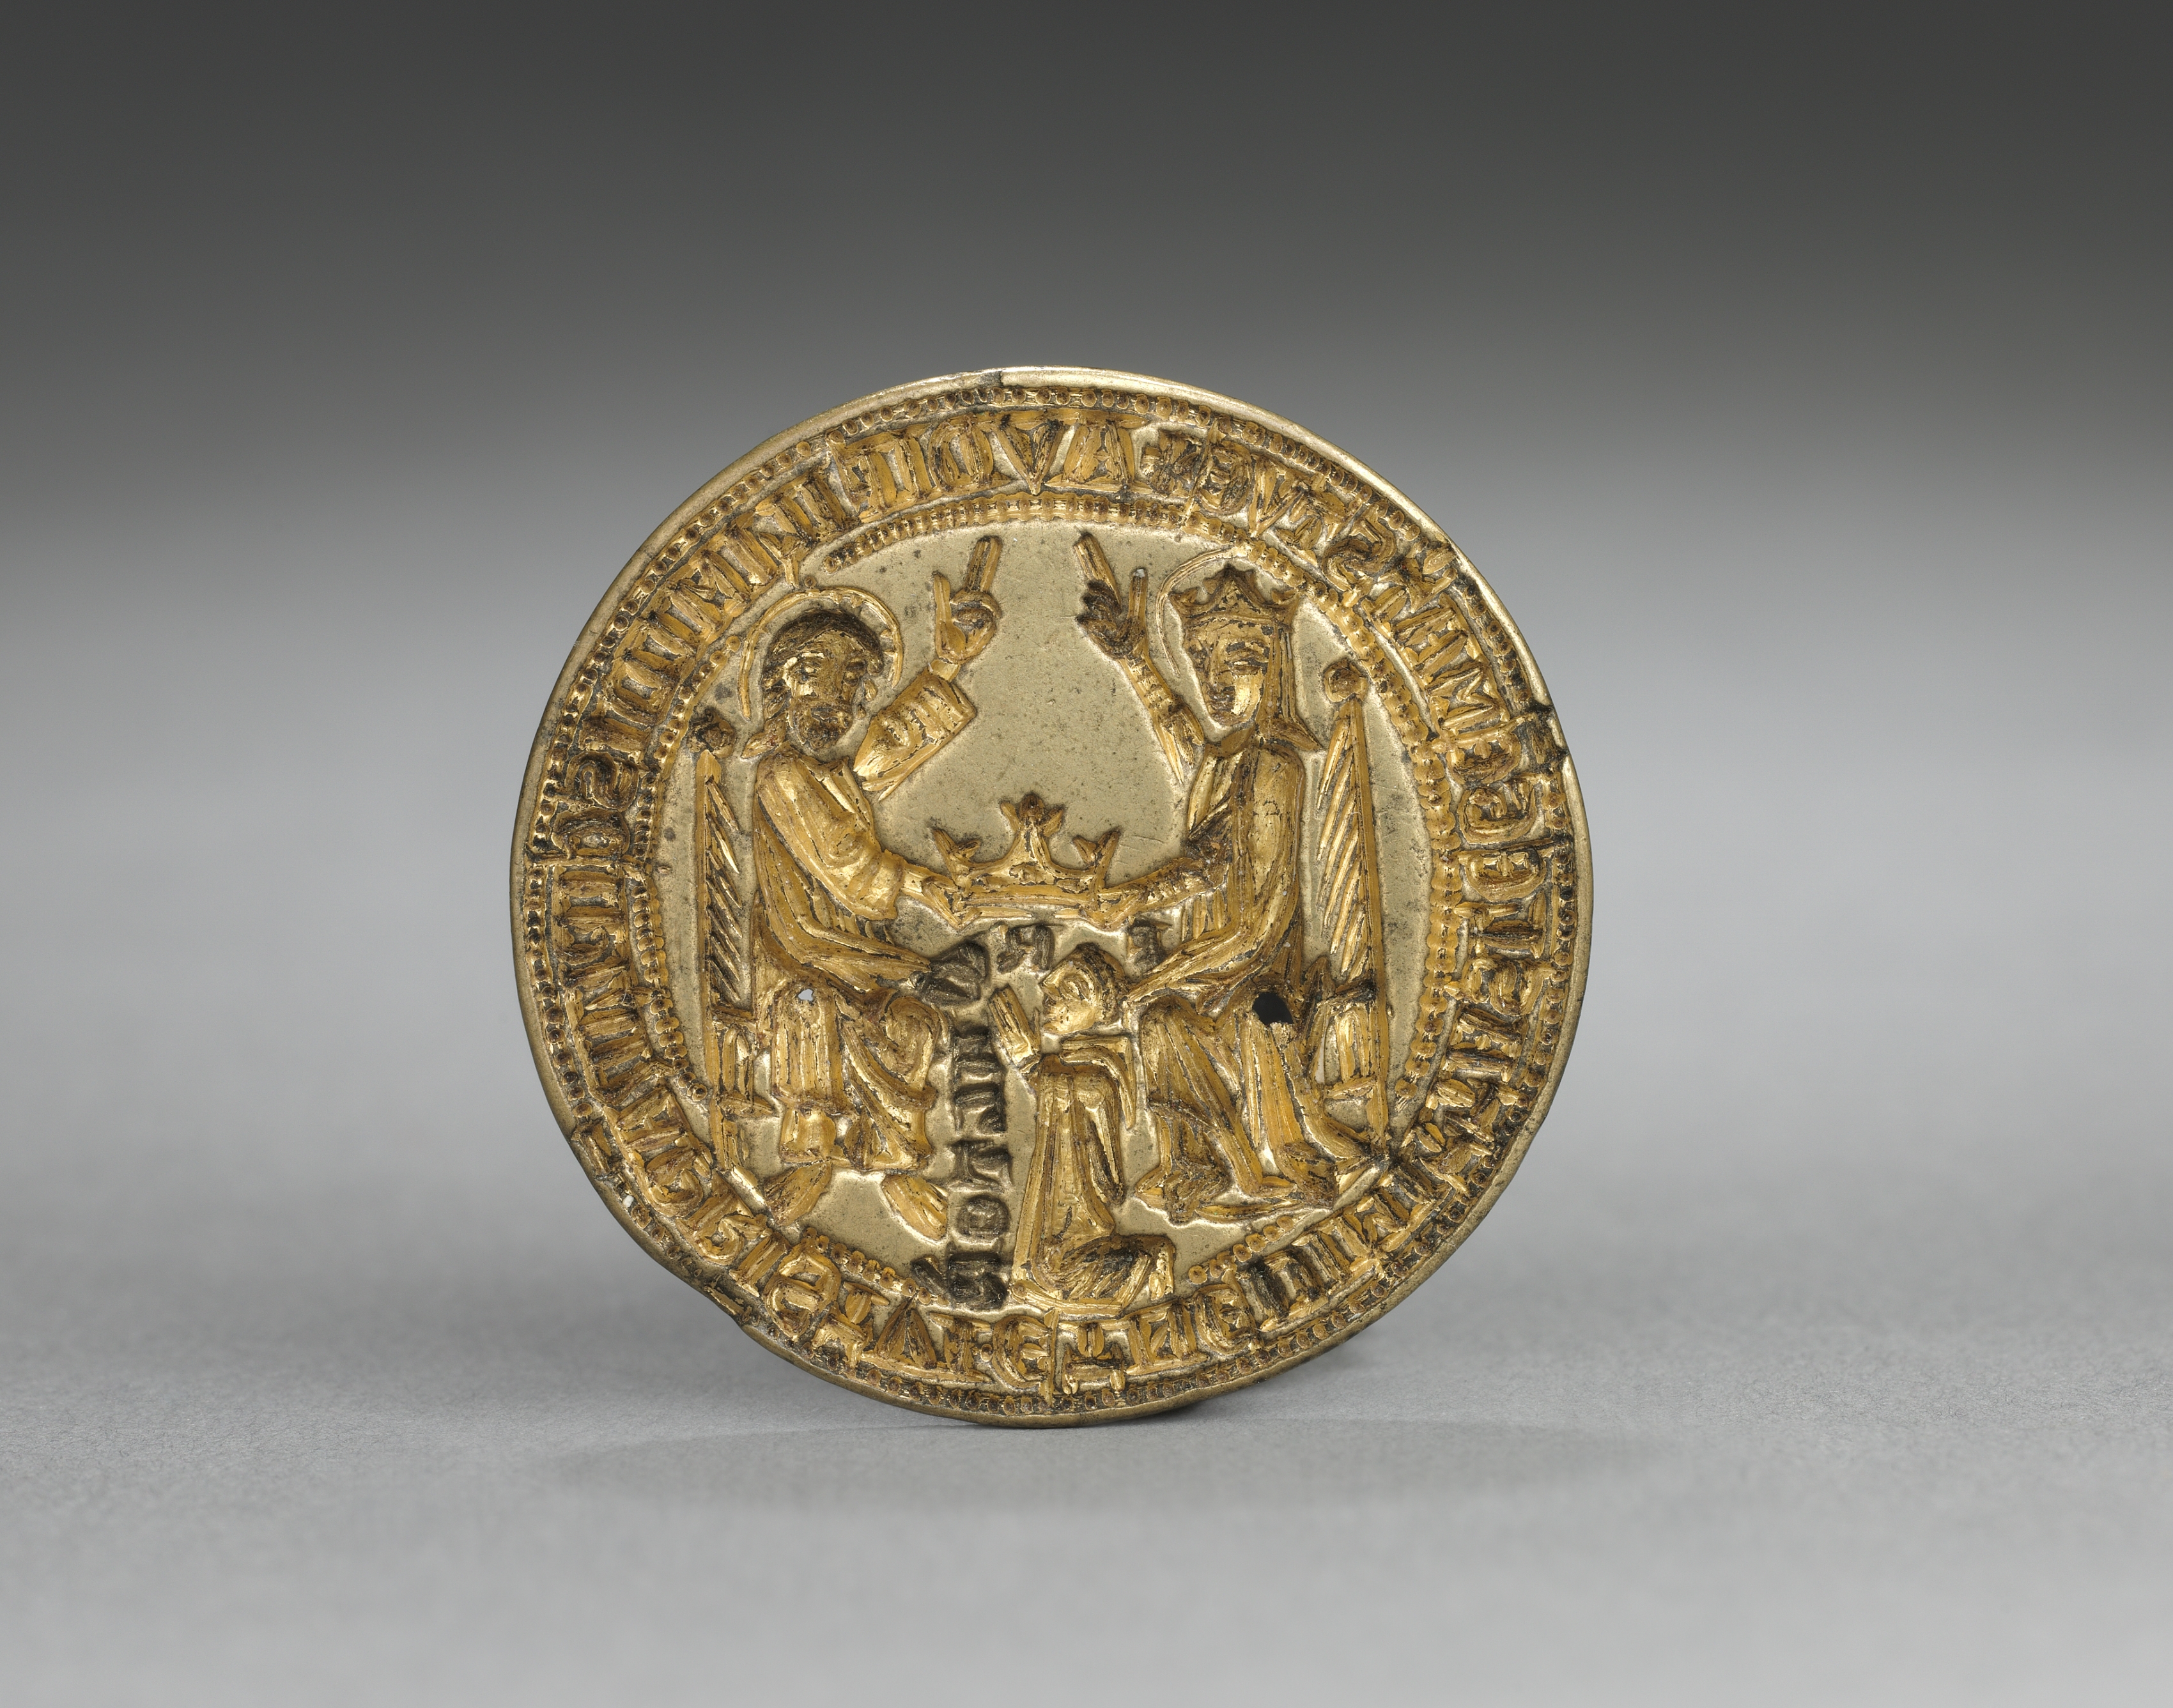 Almond-Shaped Seal: Coronation of the Virgin with a Kneeling Monk